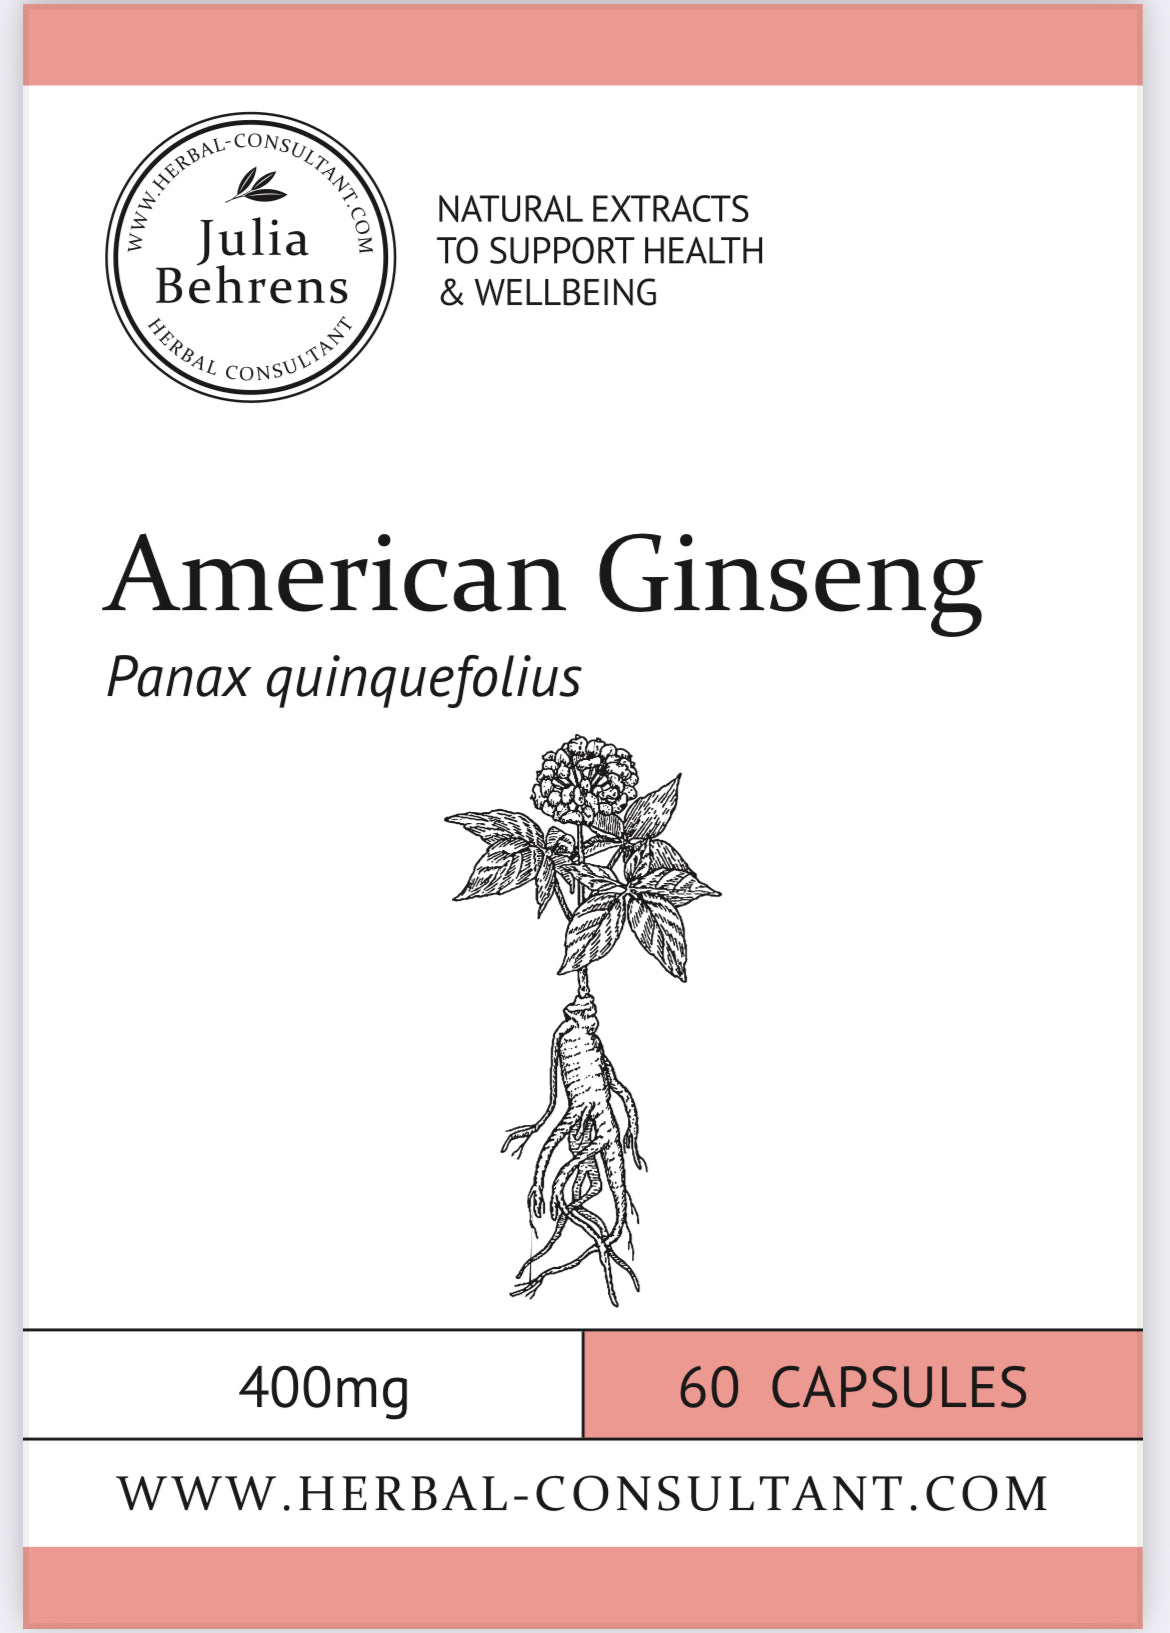 American Ginseng capsules by Julia Behrens